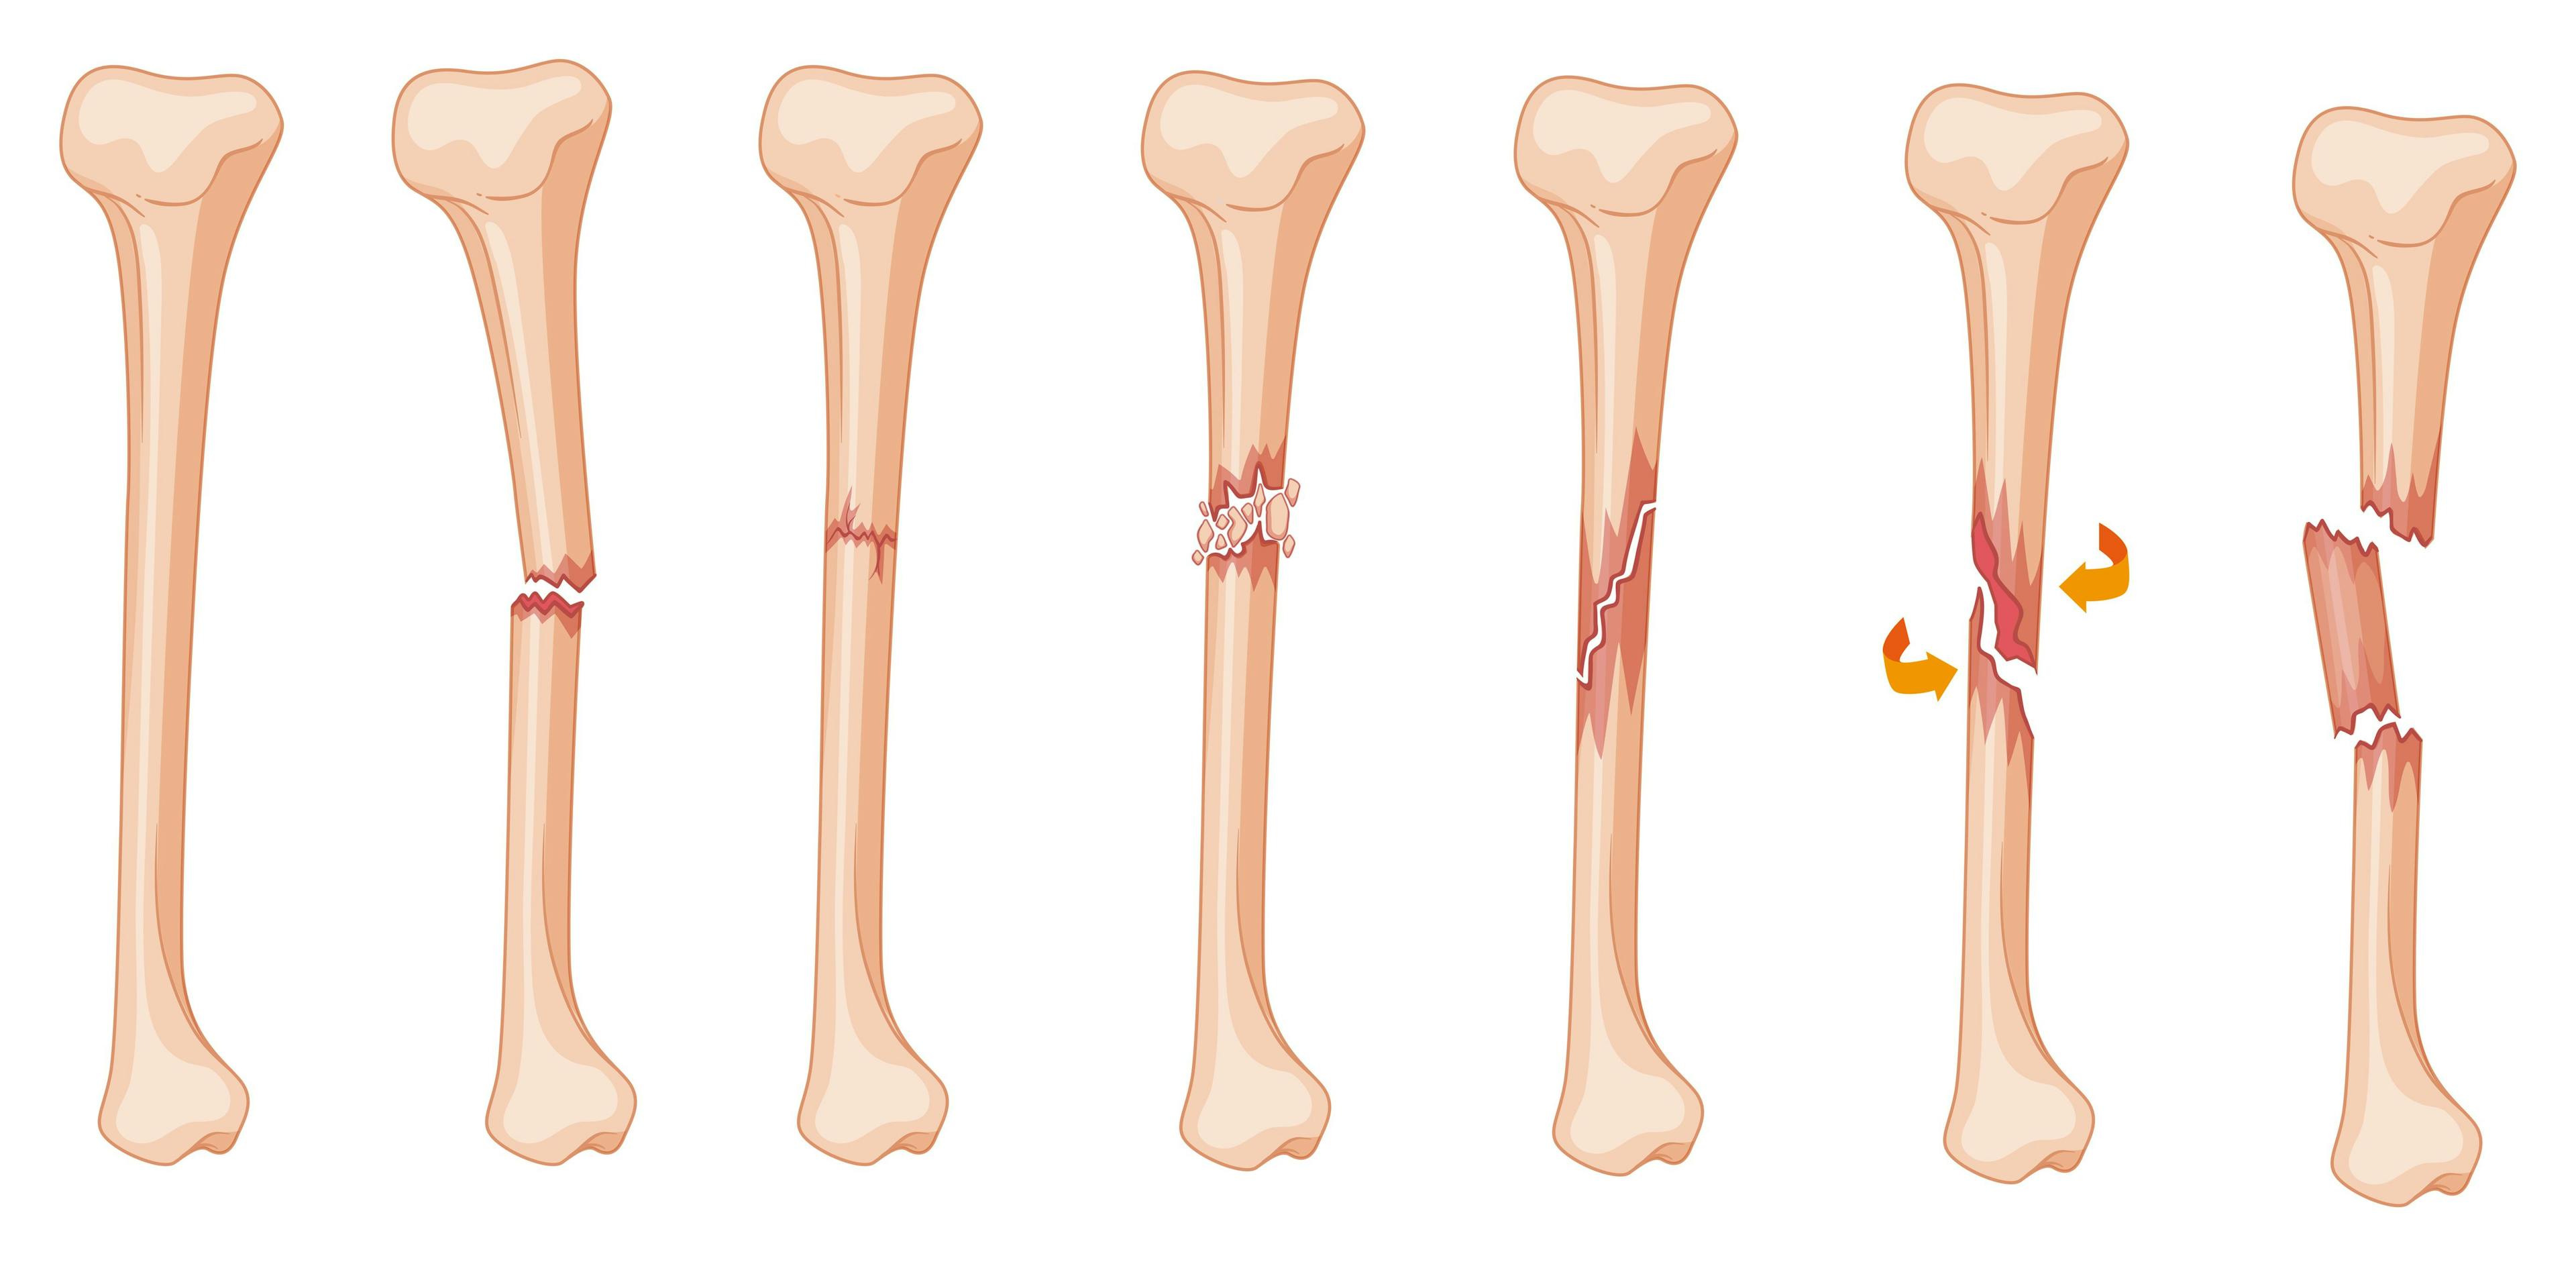 Leg Fracture Stages | image credit: GraphicsRF - stock.adobe.com